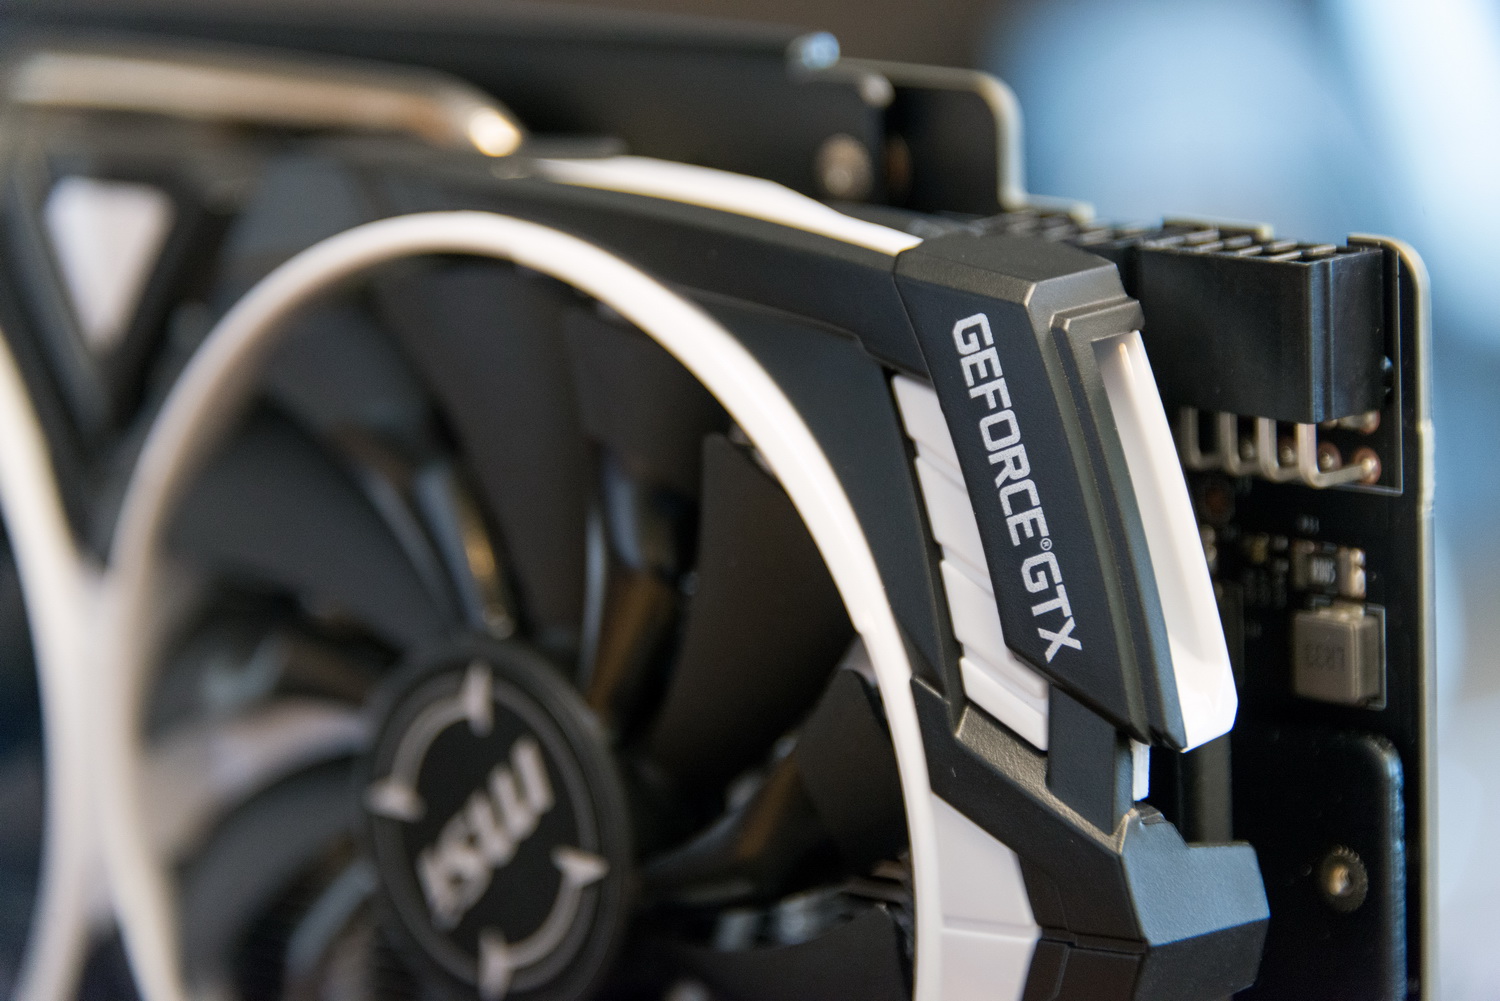 MSI GeForce GTX Ti Armor 11G Review Trends